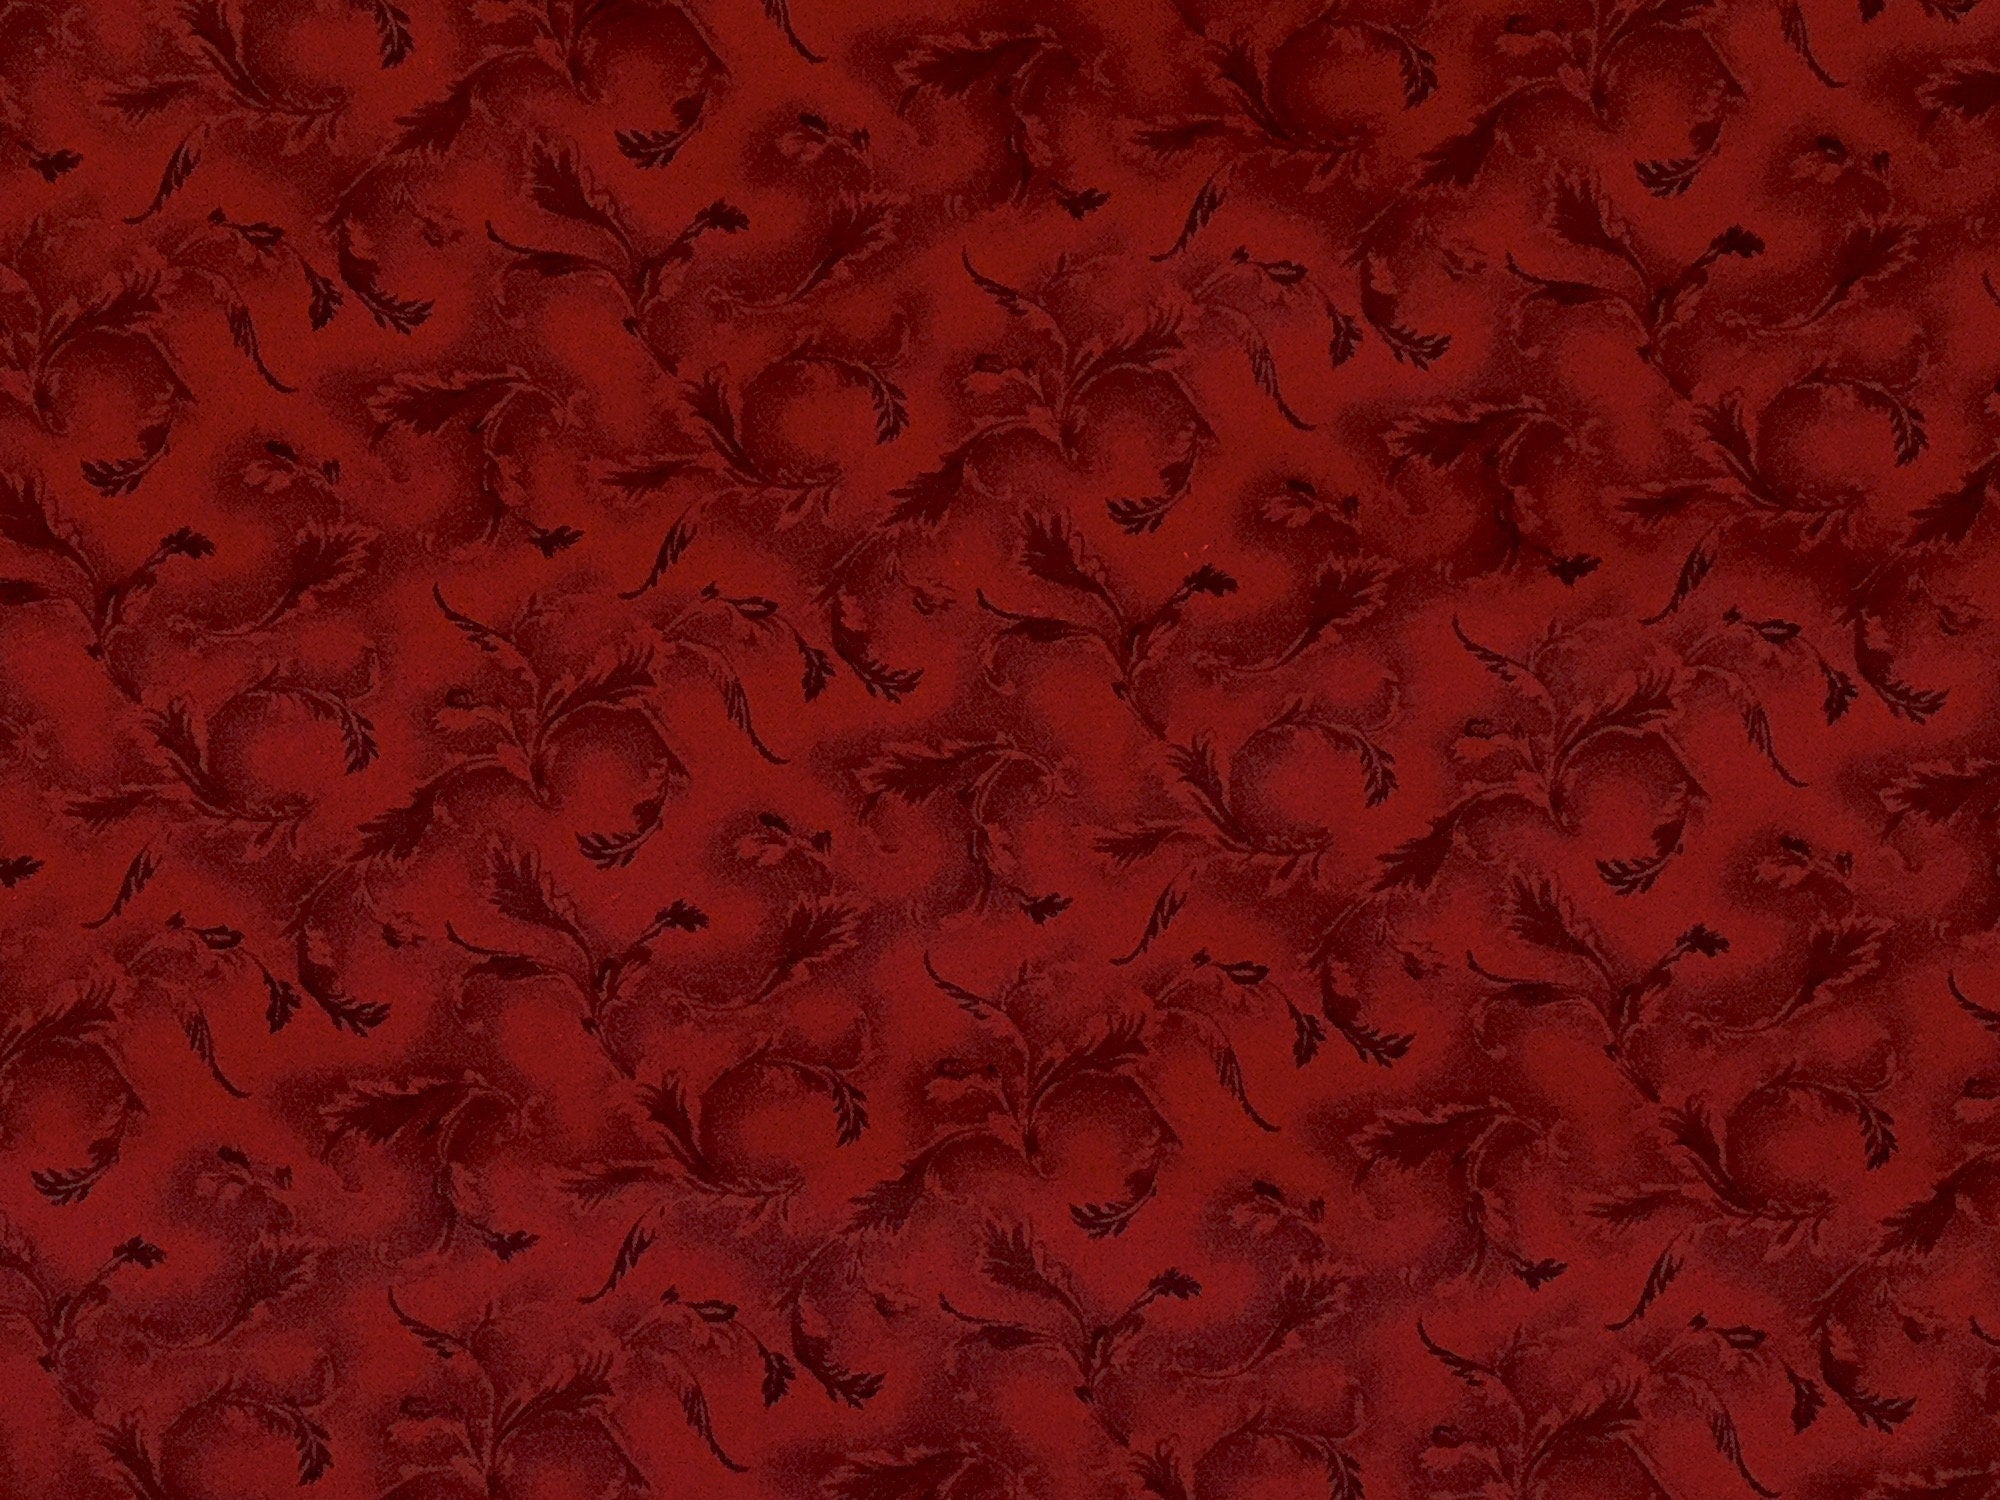 Red cotton fabric covered with leaves.